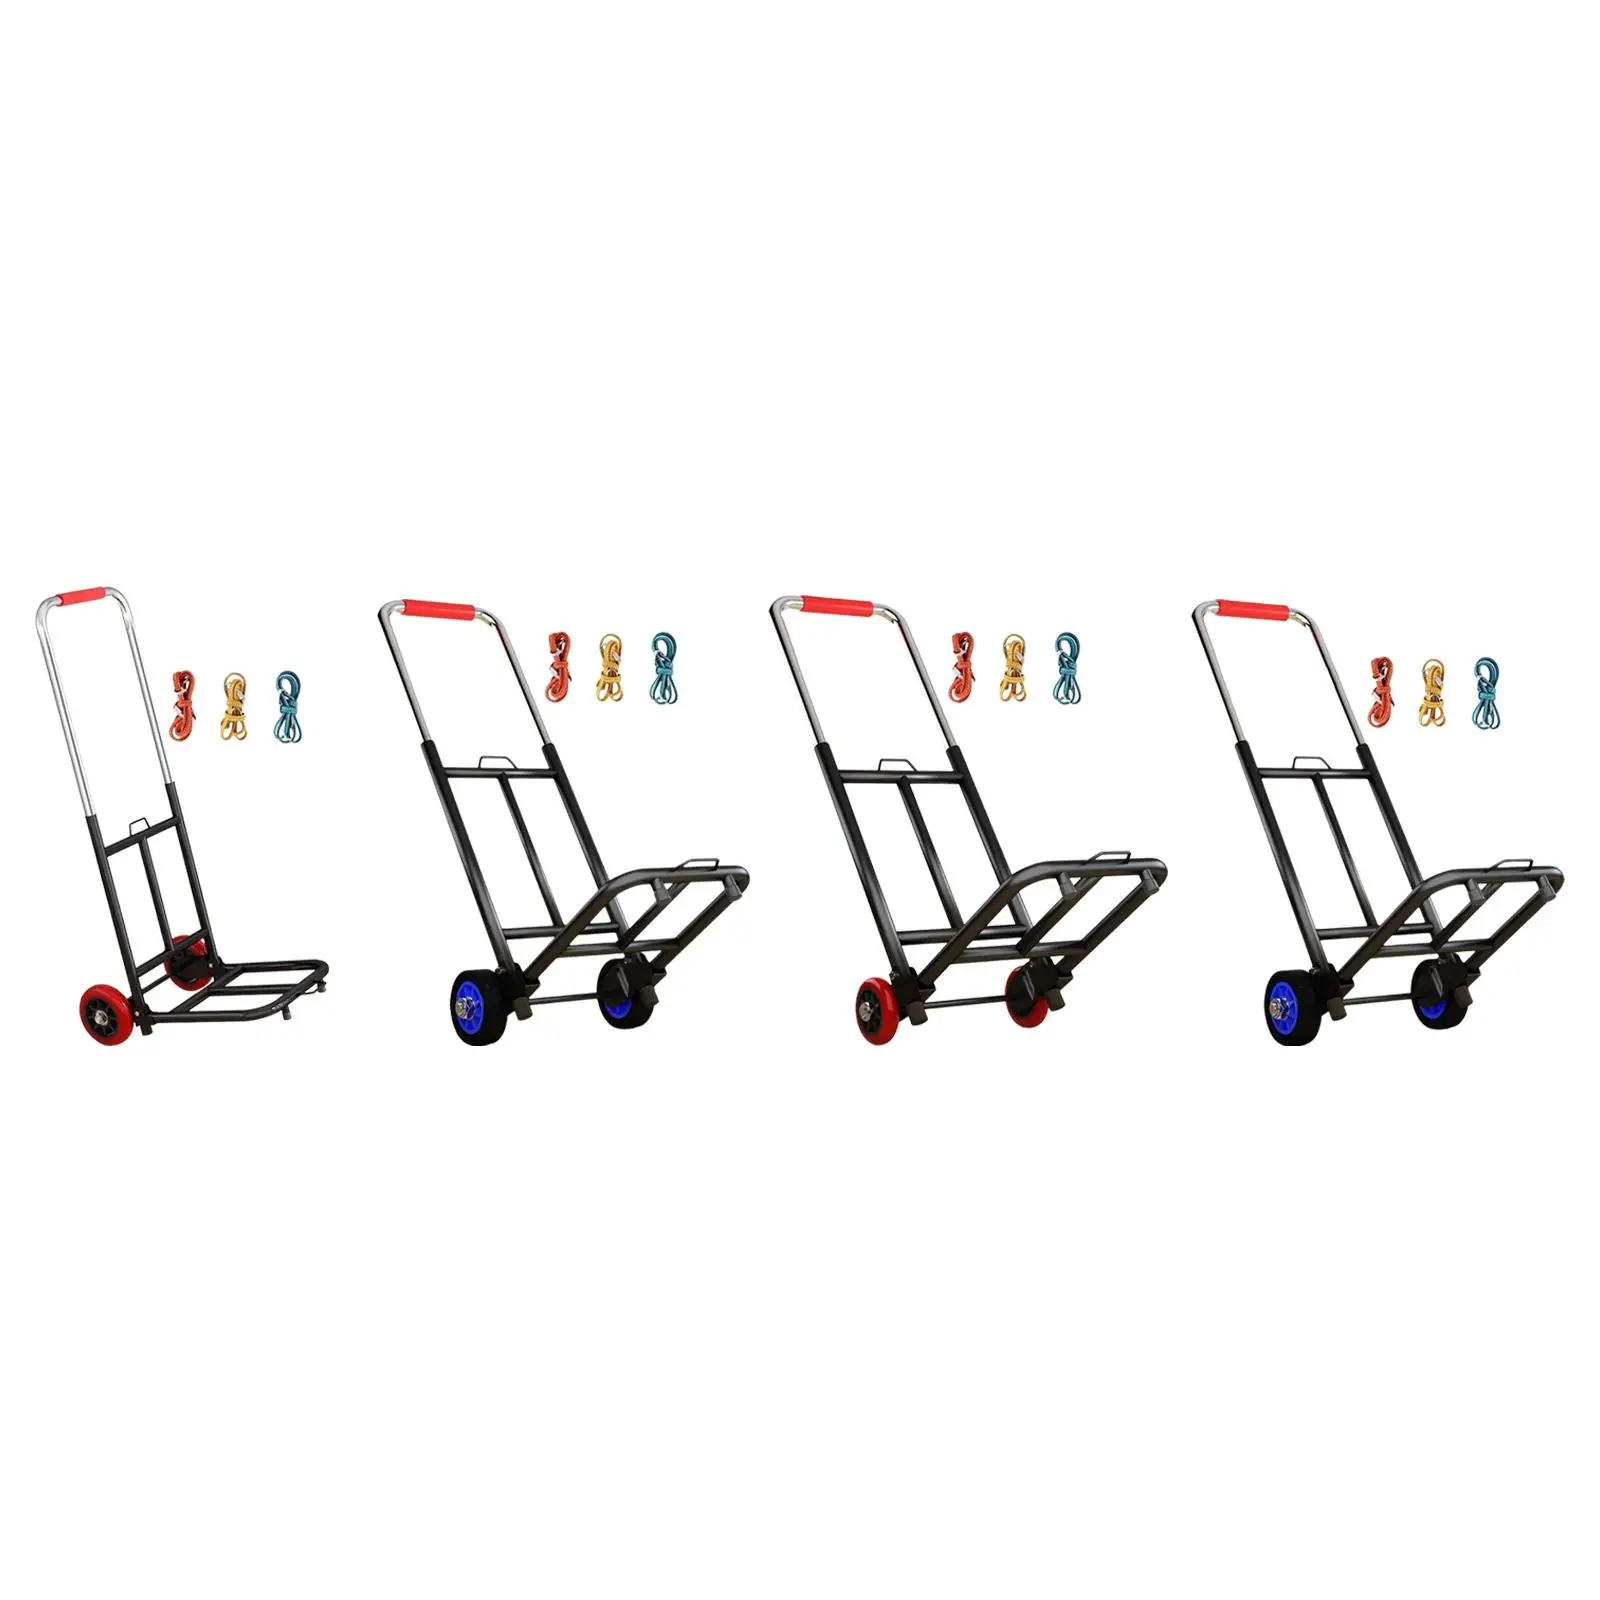 Foldable Hand Truck Adjustable Handle Collapsible Trolley Cart for Couriers 26x42cm Platform